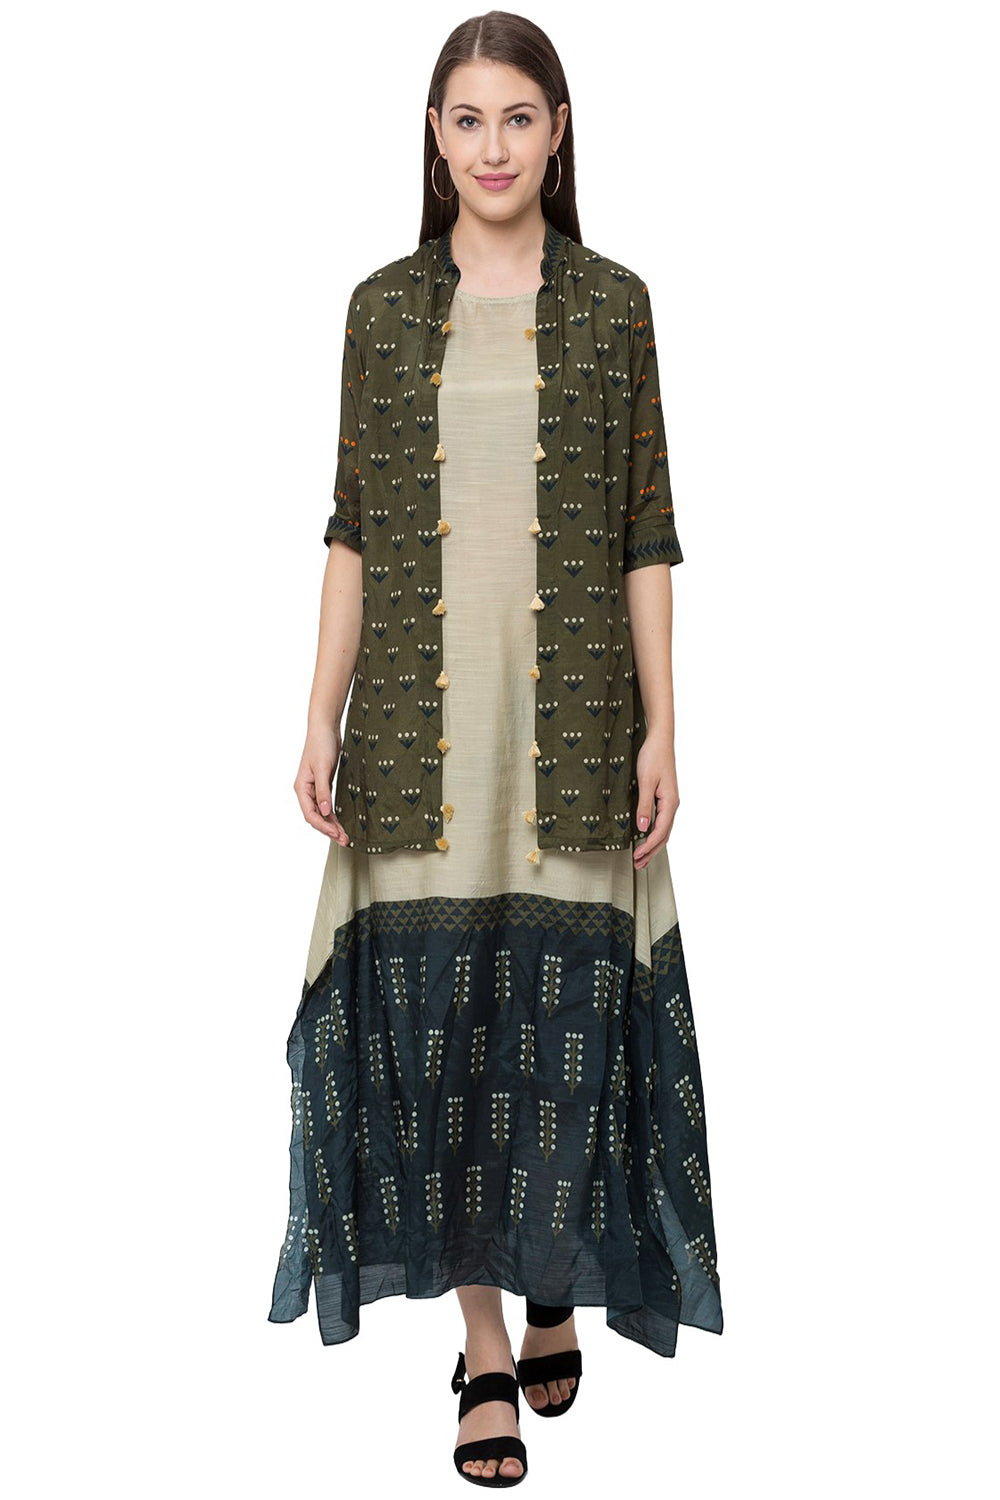 Asymmetrical Tree Printed Sleeveless Dress And Jacket With Tassel Detail